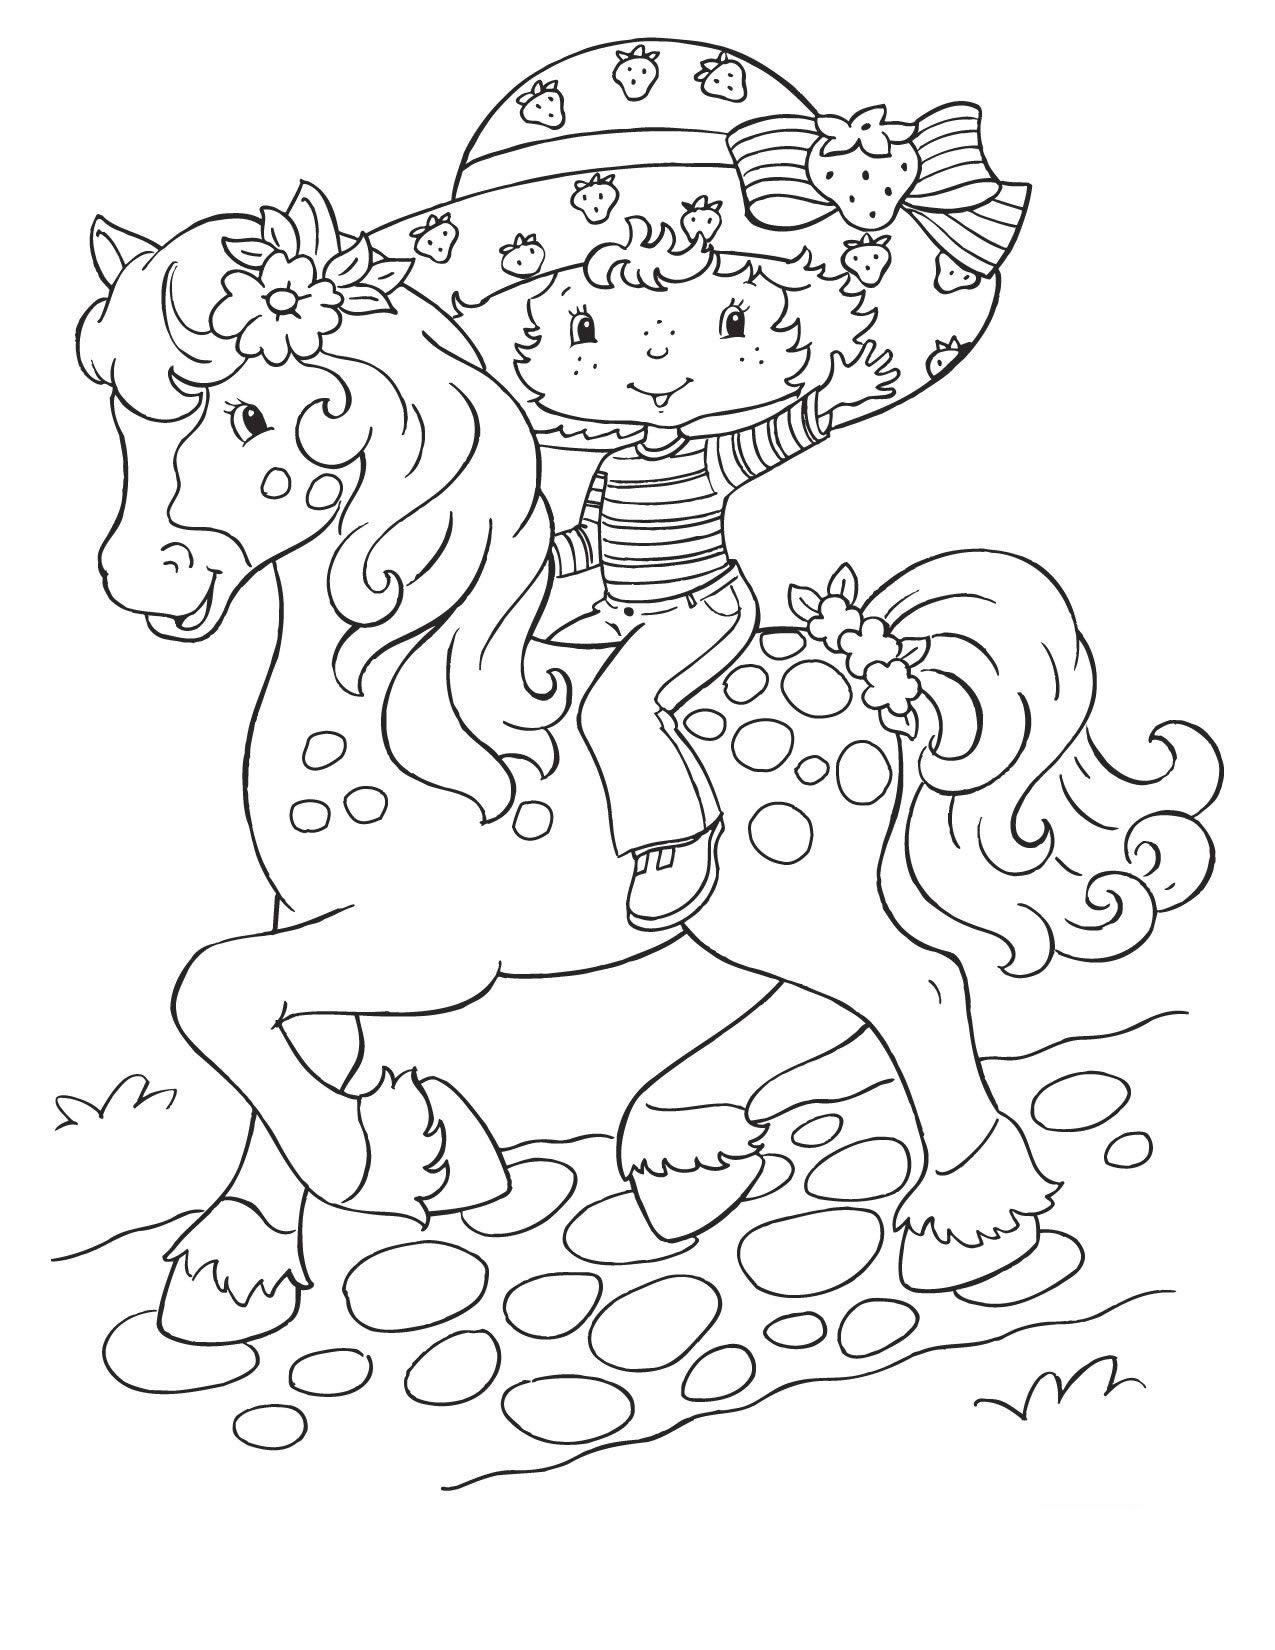 strawberry shortcake colouring pages to print 830 best coloring pages images on pinterest coloring strawberry colouring print shortcake to pages 